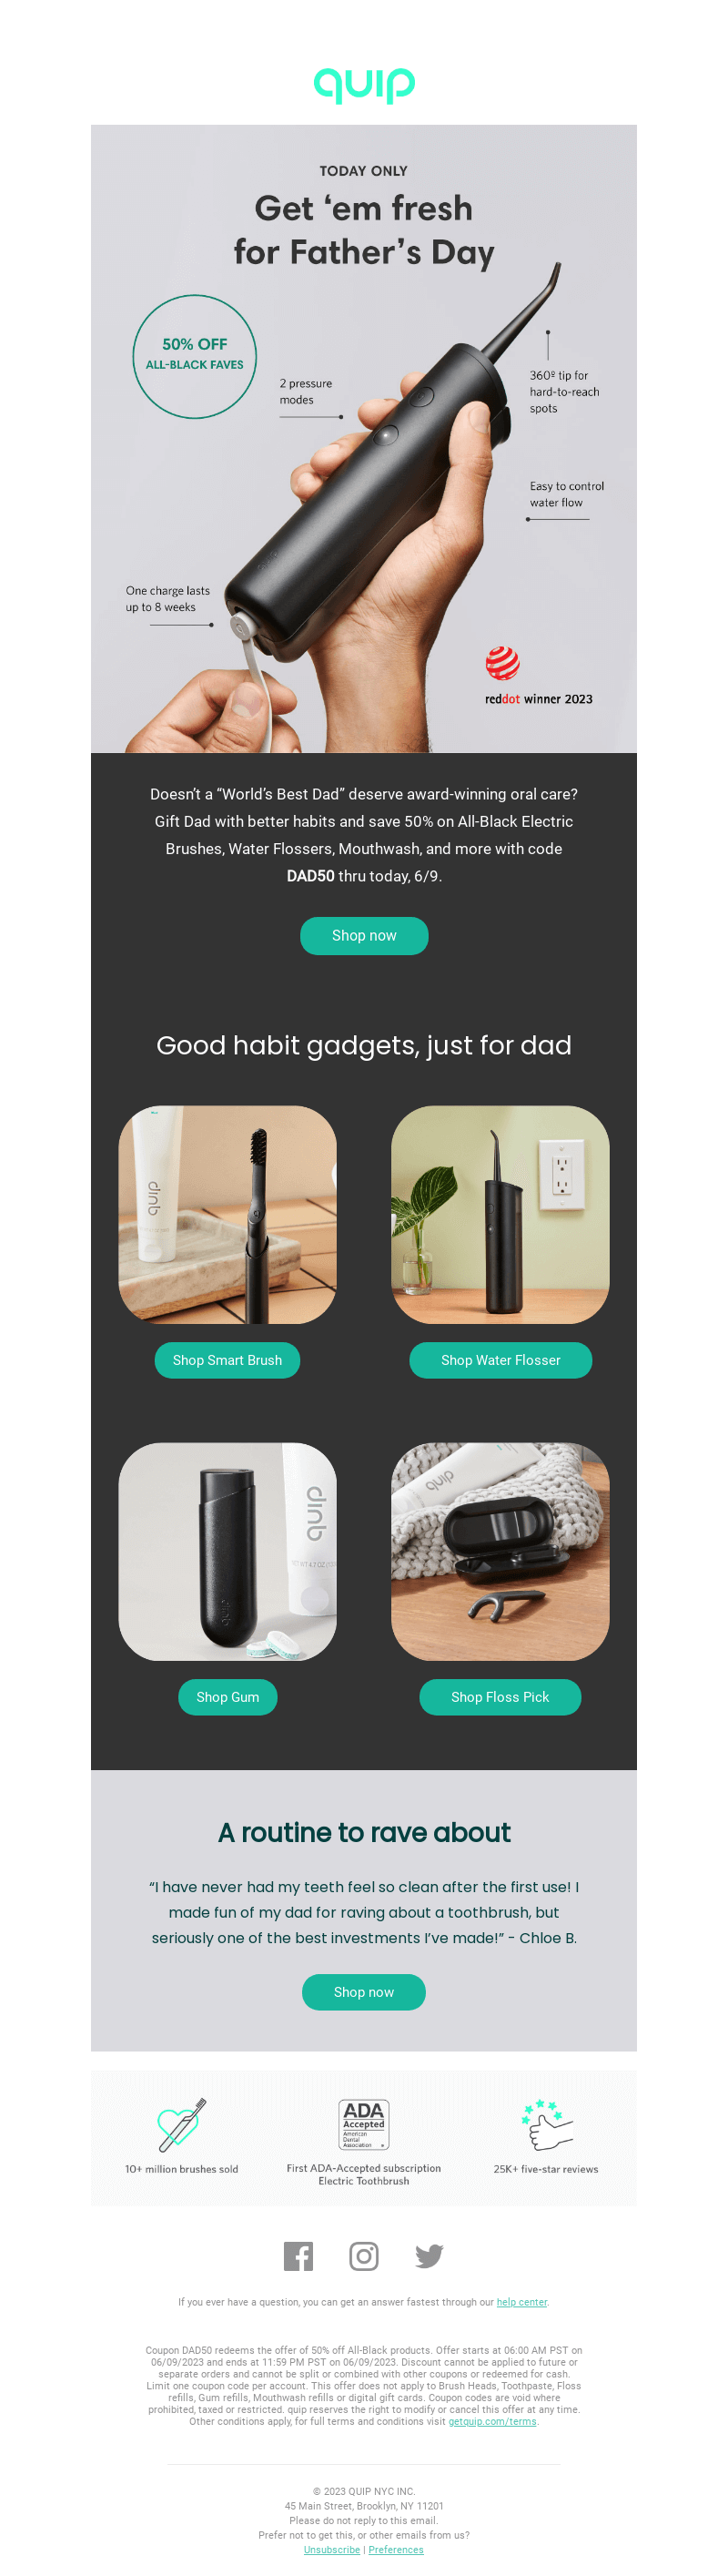 Father’s Day email campaign